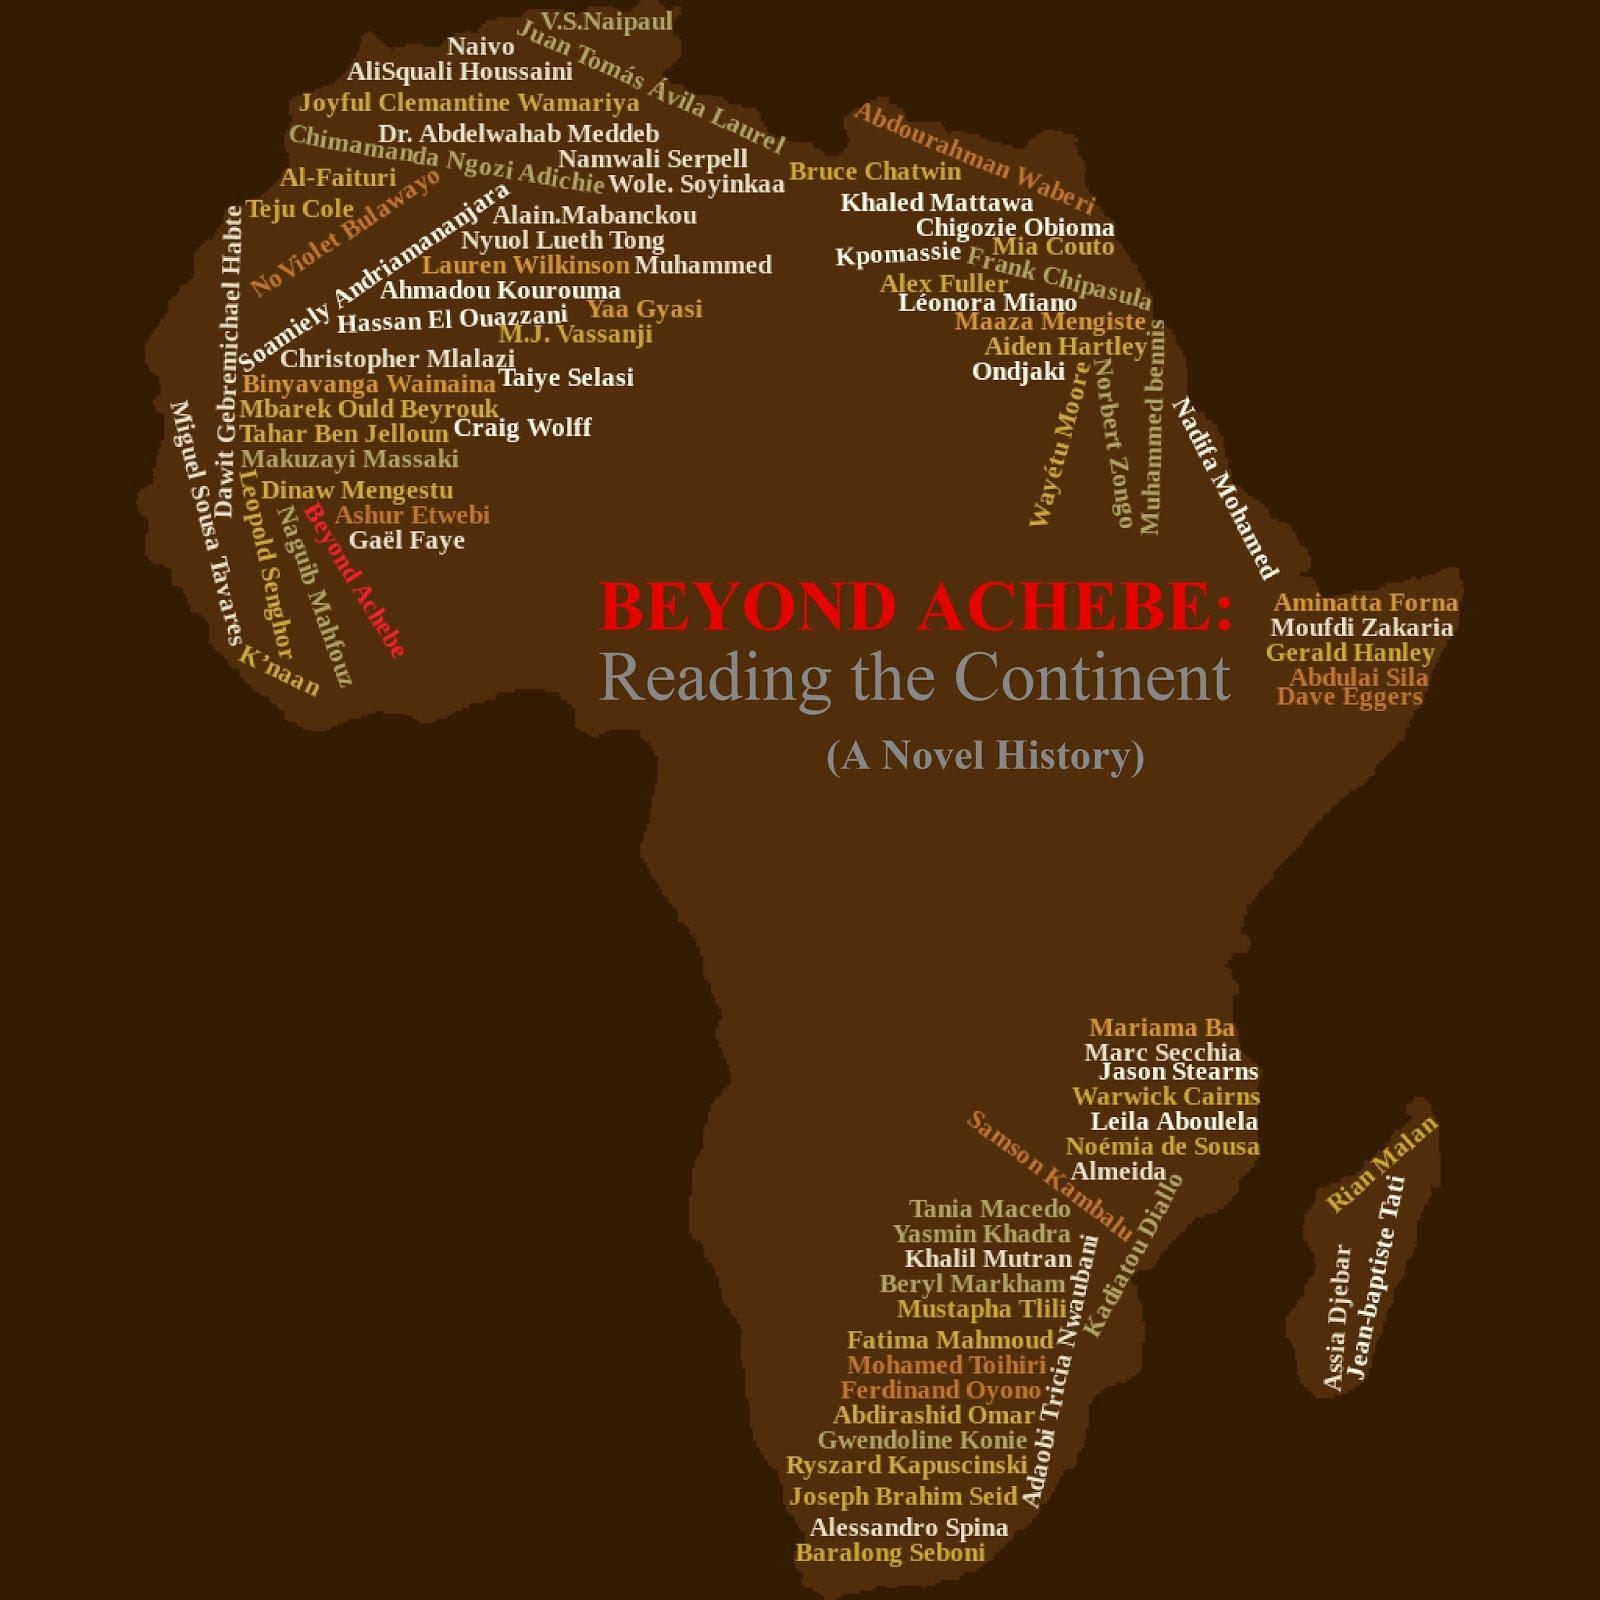 Beyond Achebe: Reading the Continent